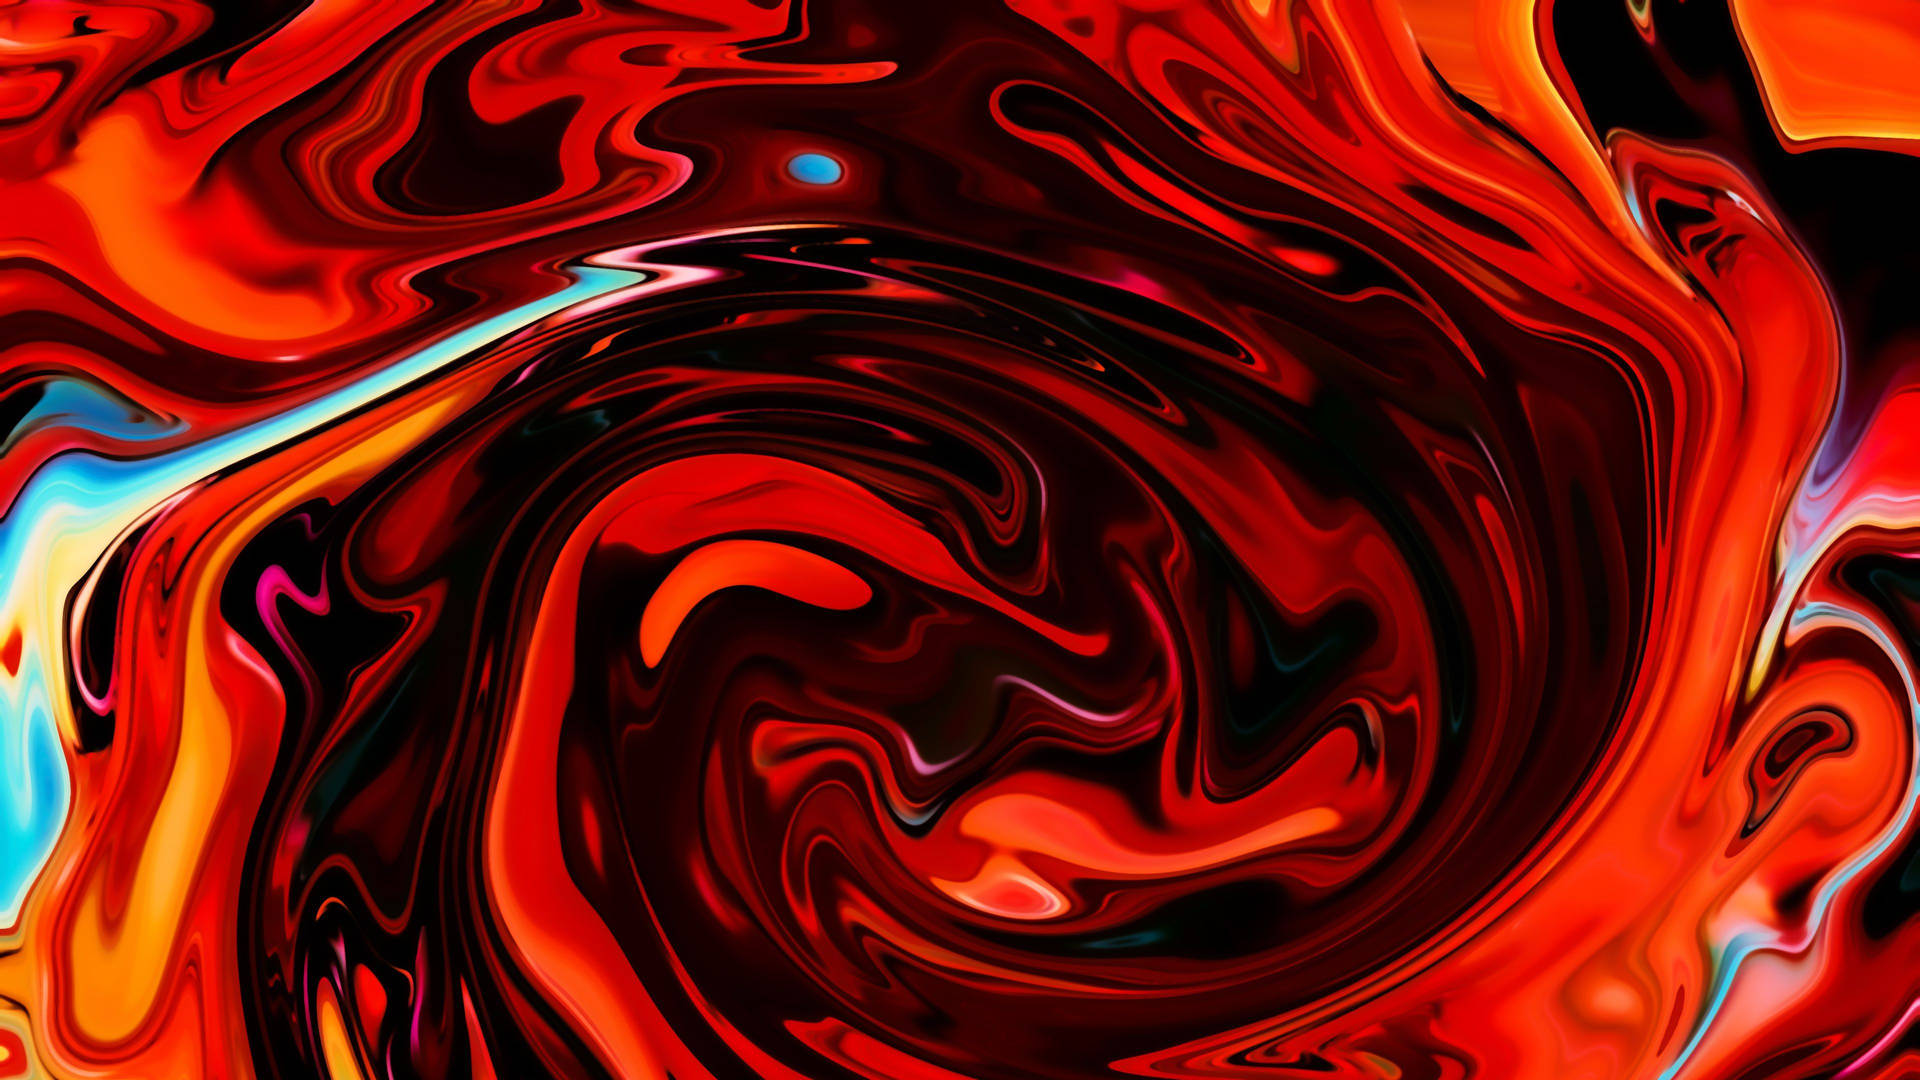 Red Abstract With Float Swirl Design Wallpaper